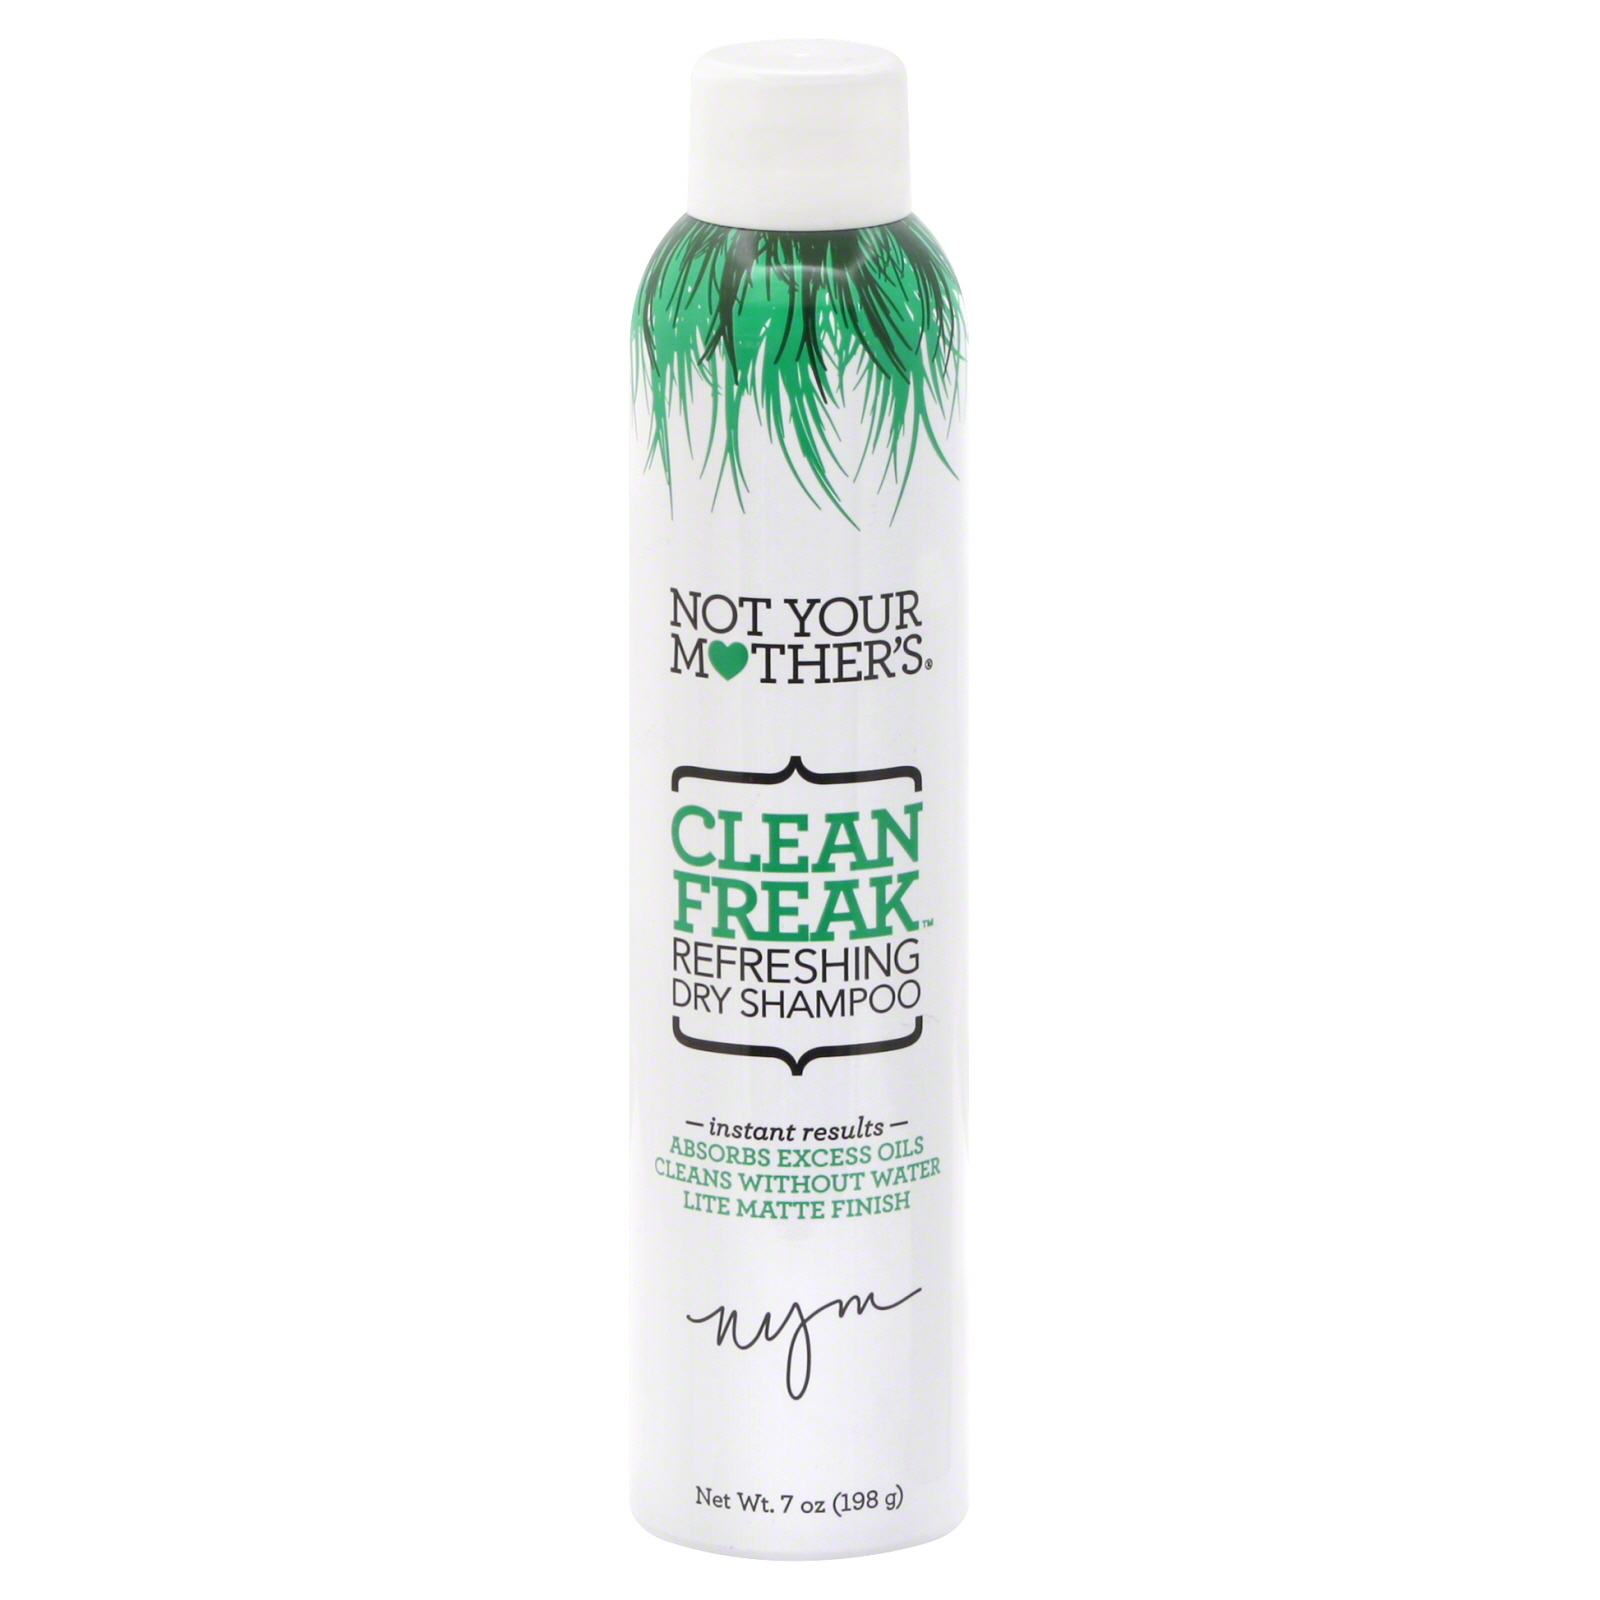 Not Your Mothers Dry Shampoo, Refreshing, Clean Freak, 7 oz (198 g)